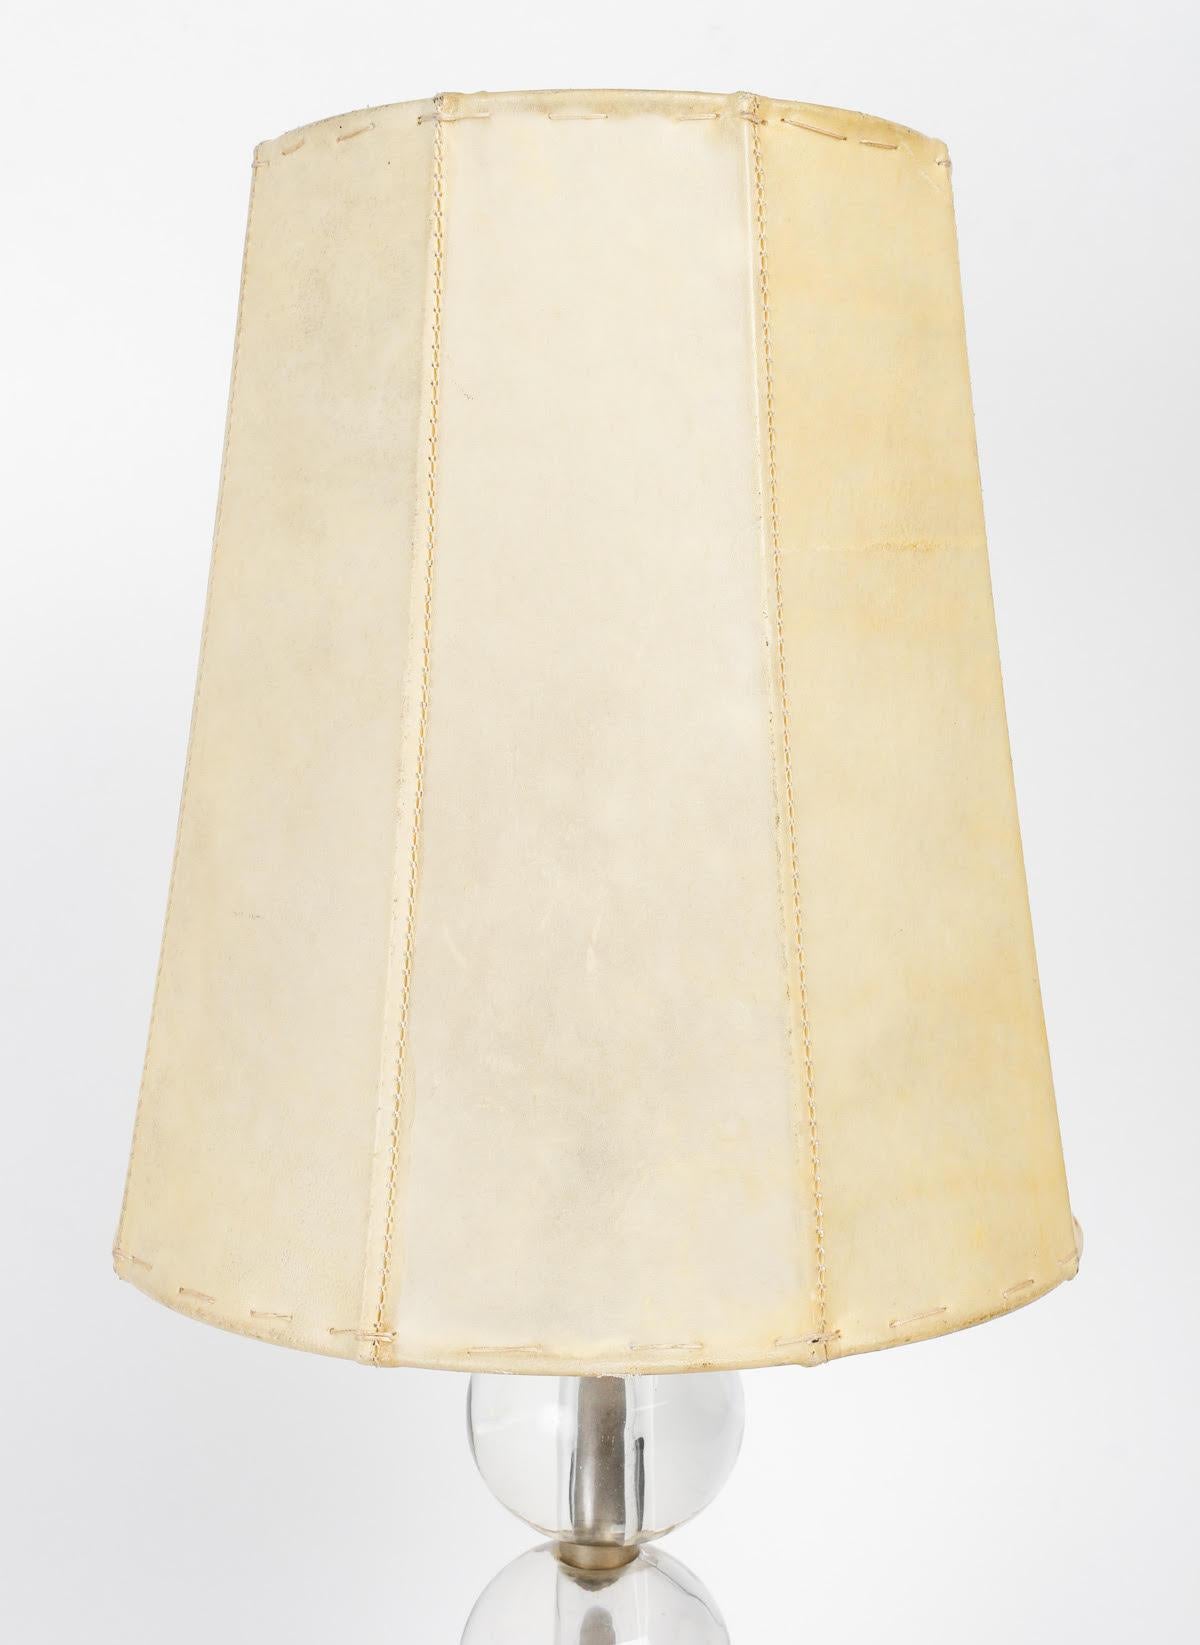 French Table Lamp by Adnet, Circa 1930, Art Deco Period.